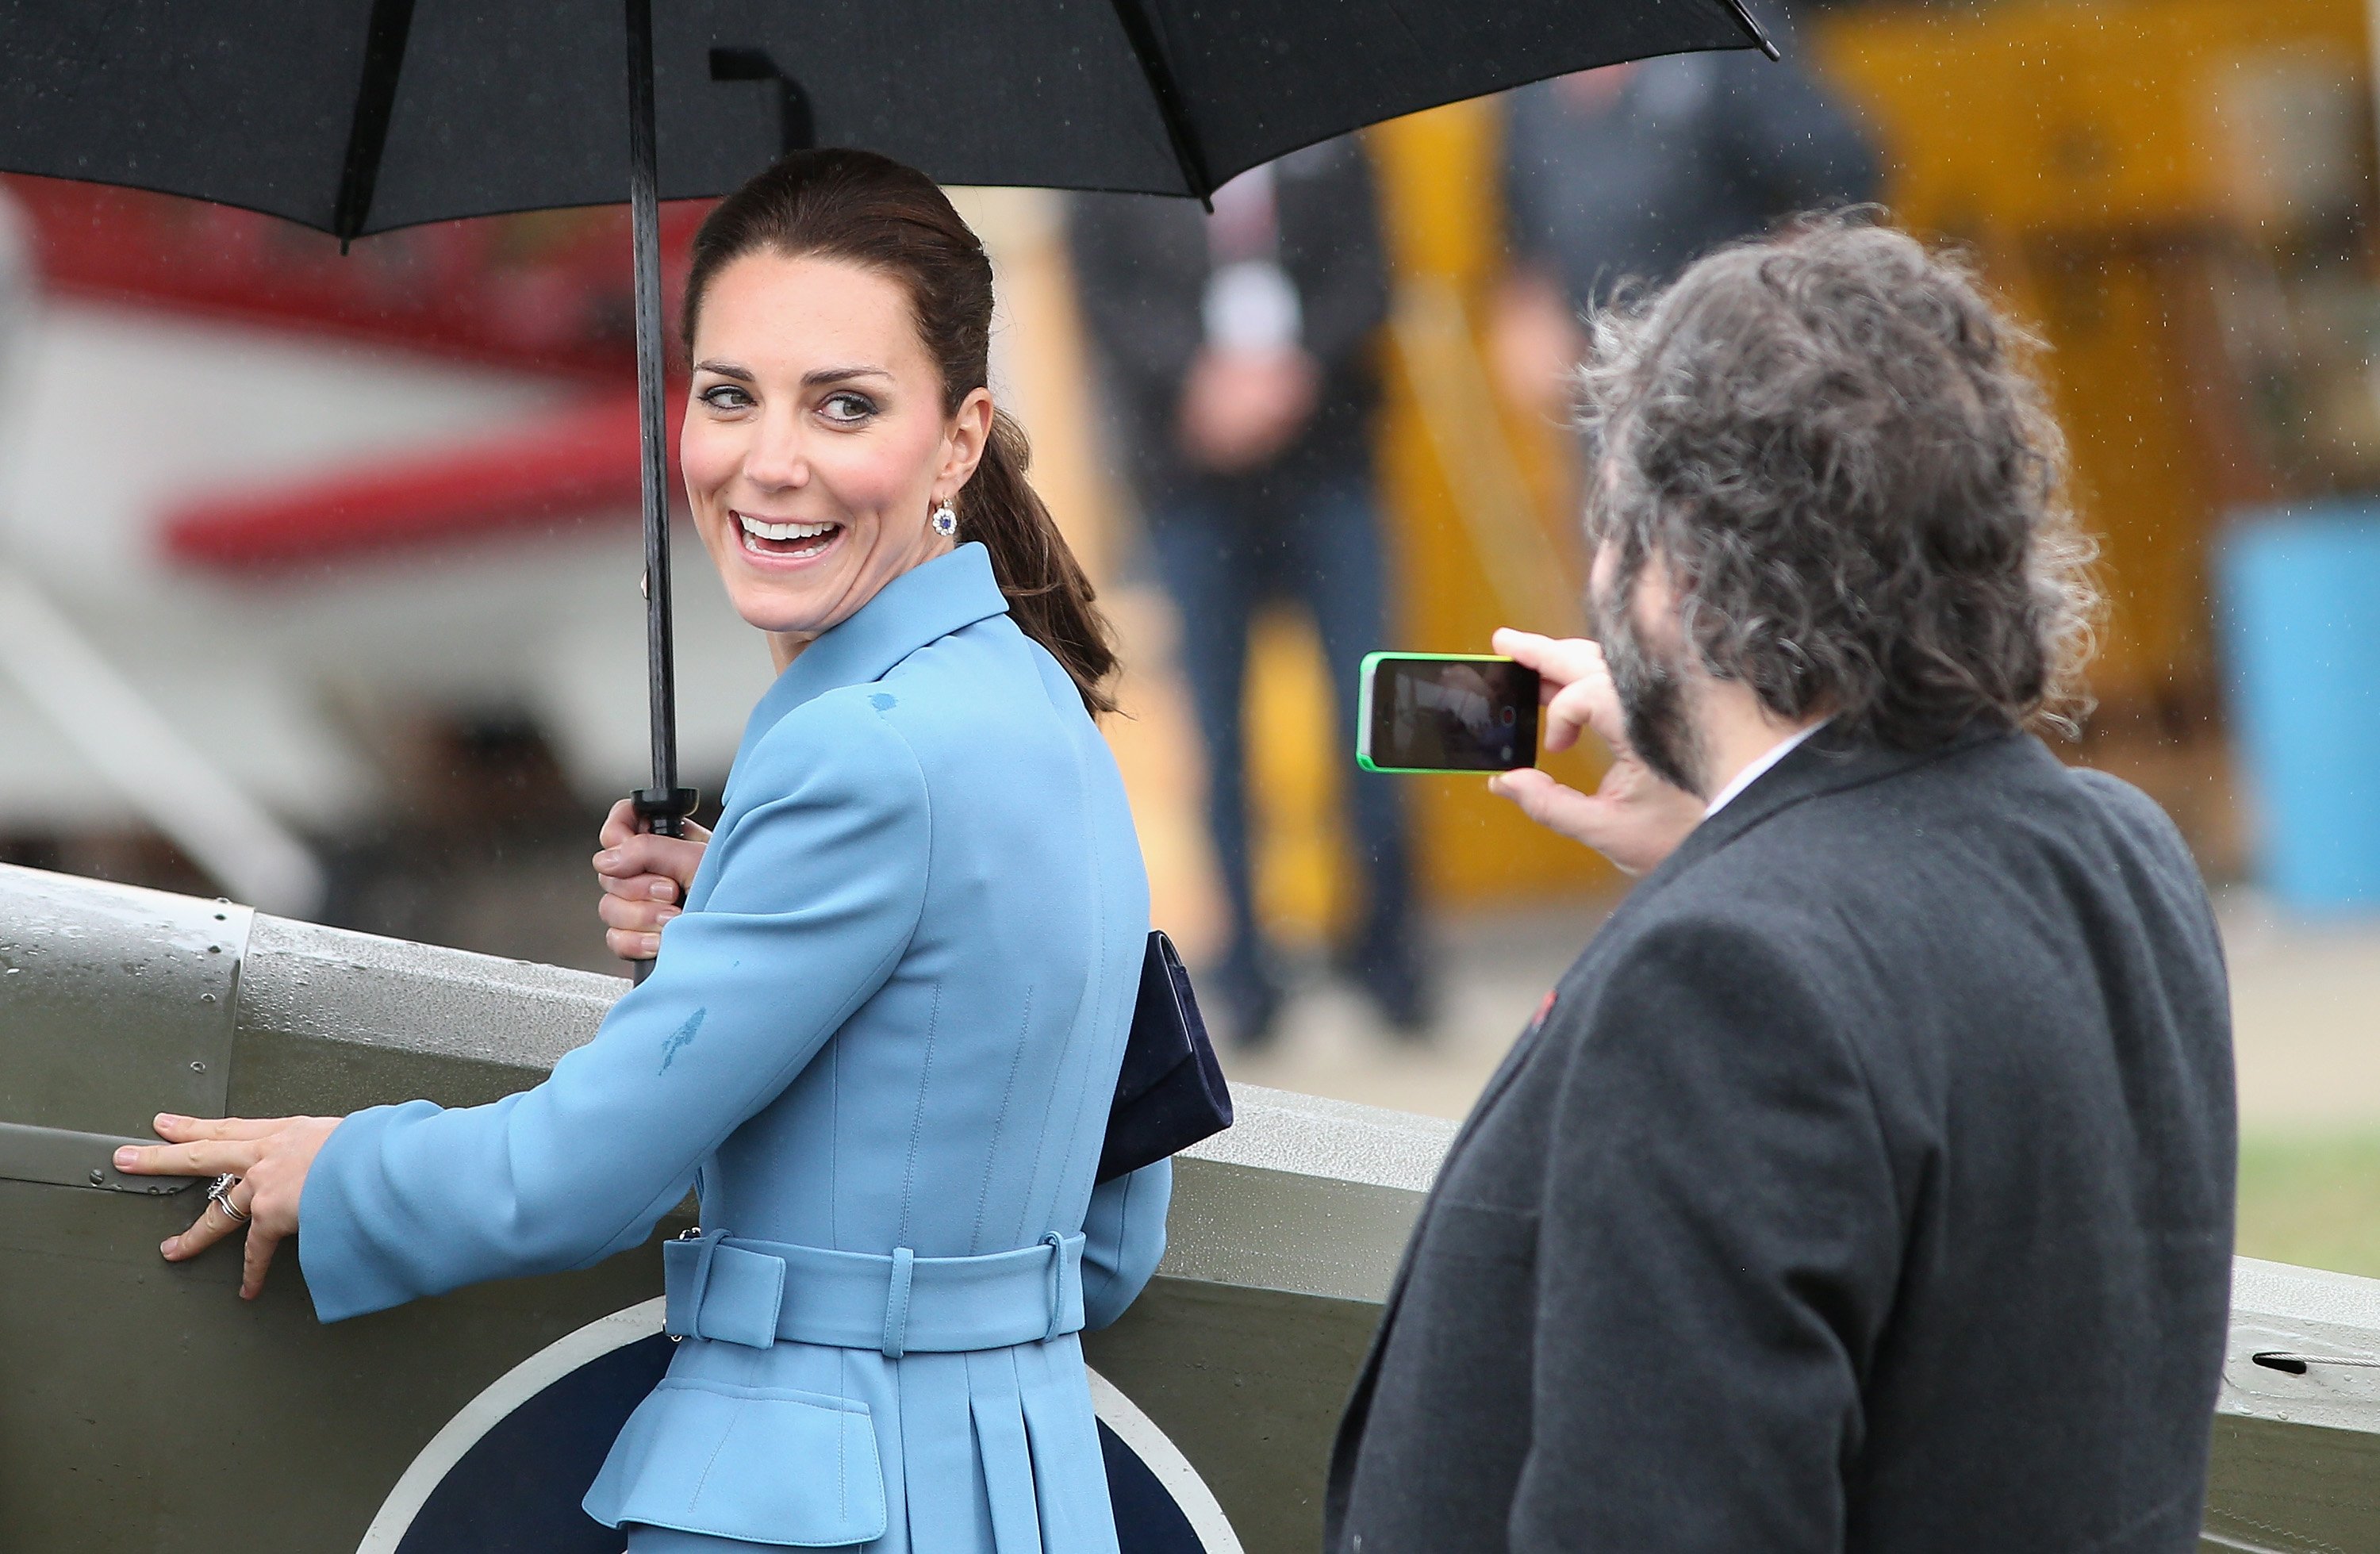 Kate Middleton, who started a new Instagram for The Royal Foundation Centre for Early Childhood, smiles getting her photo taken